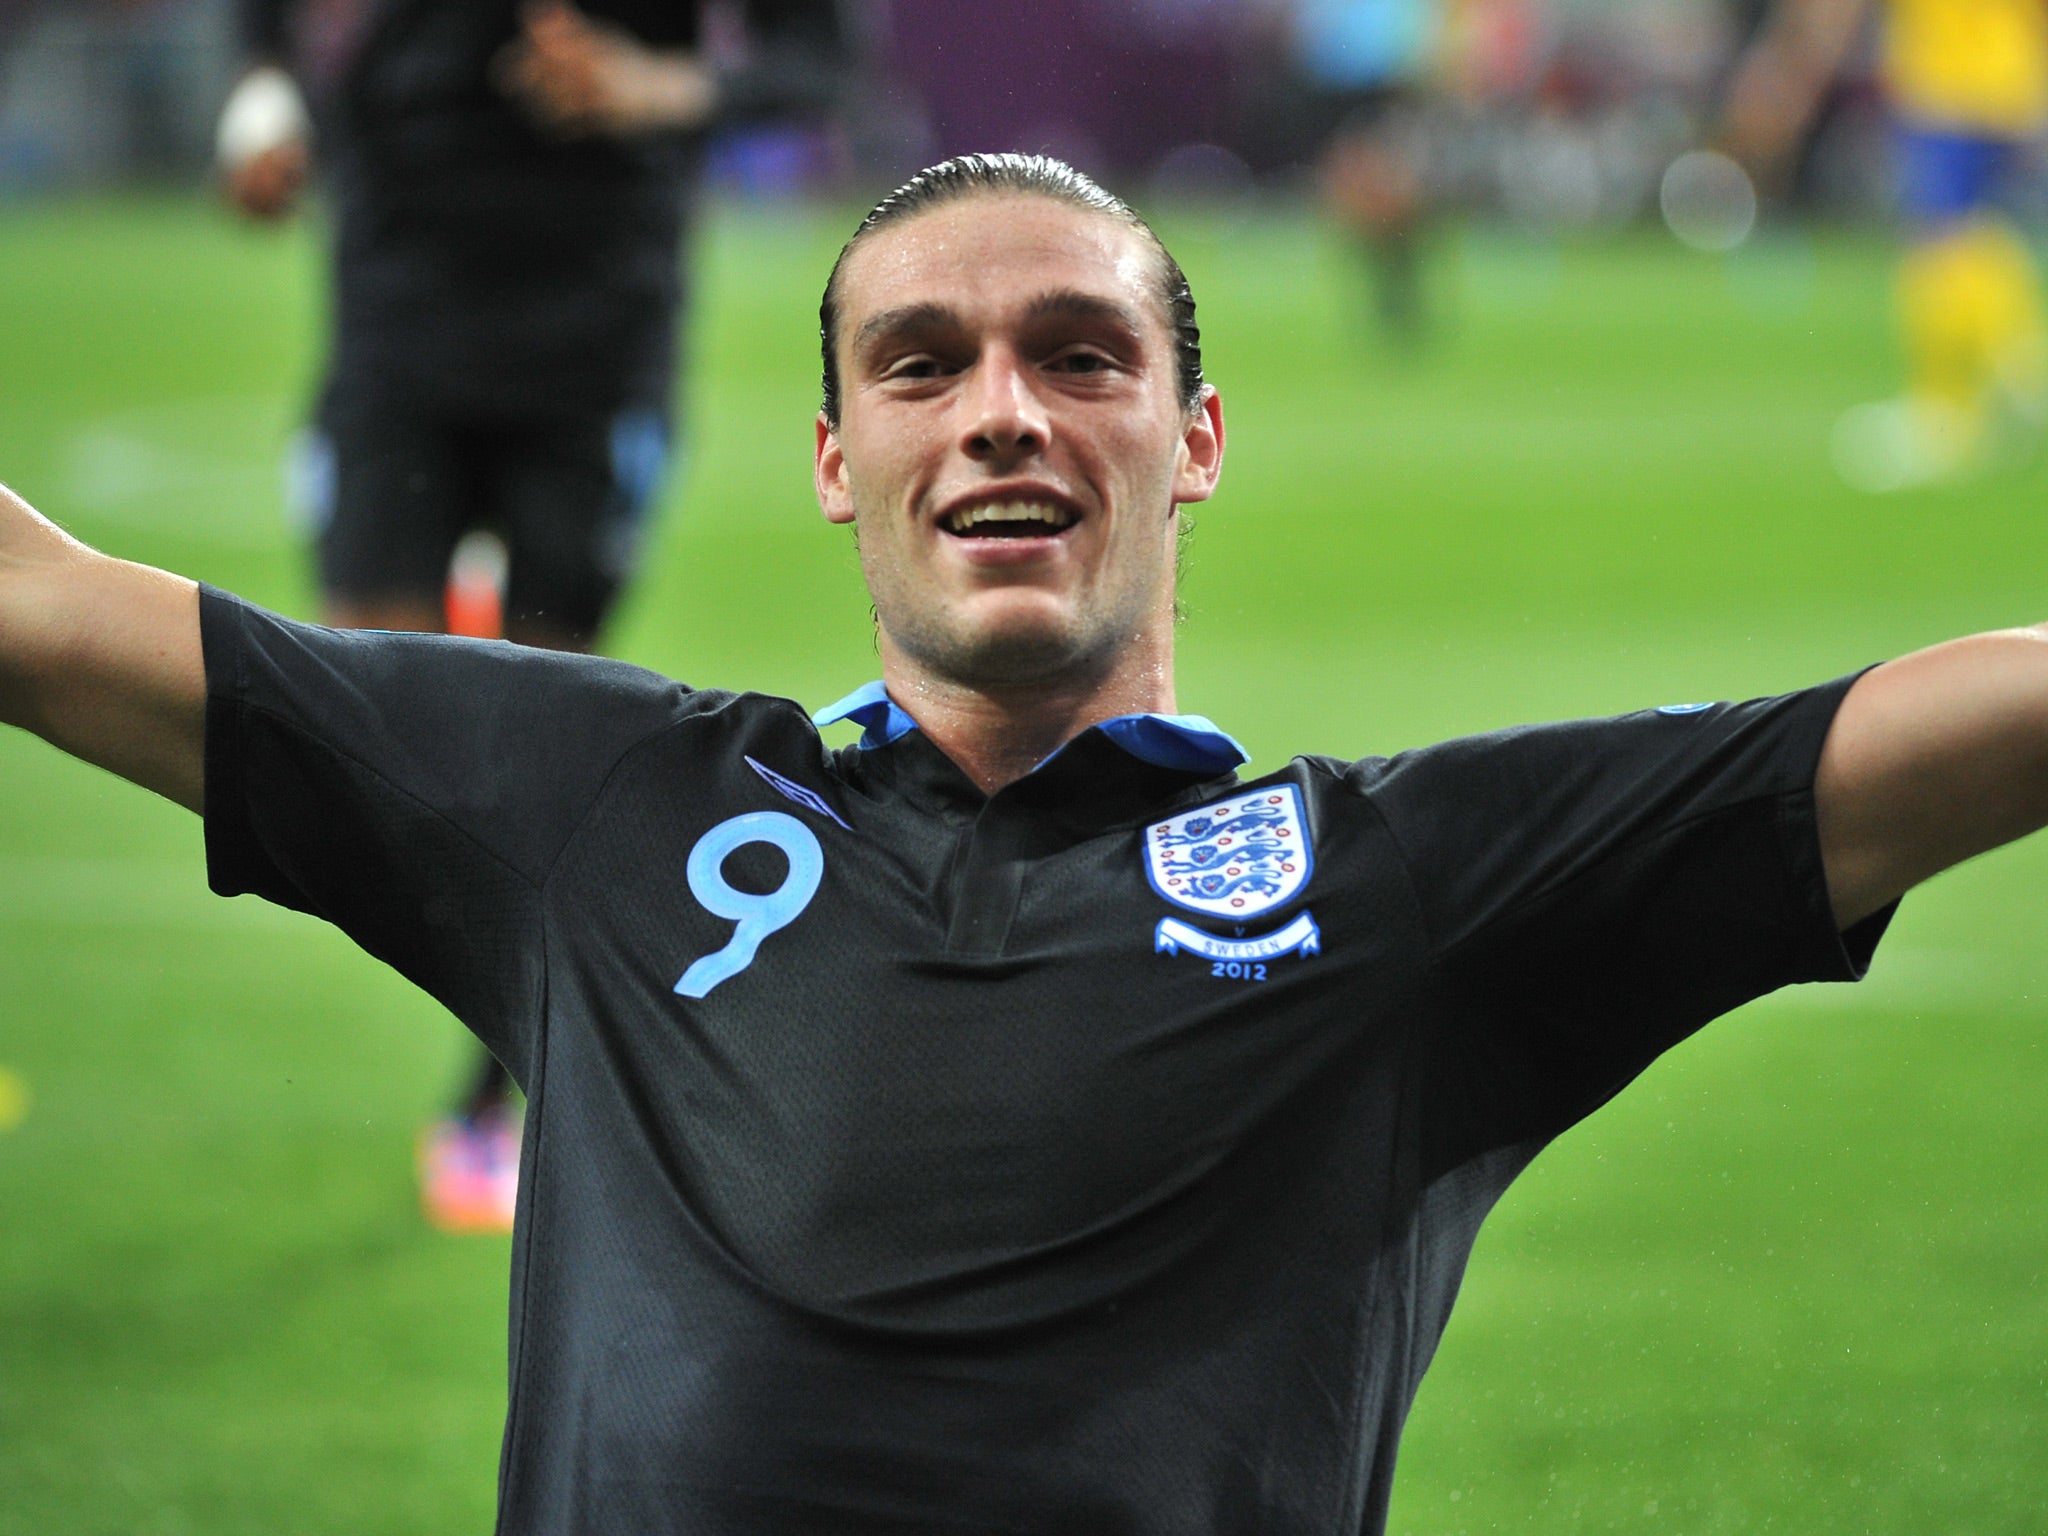 Andy Carroll pictured after scoring against Sweden at Euro 2012